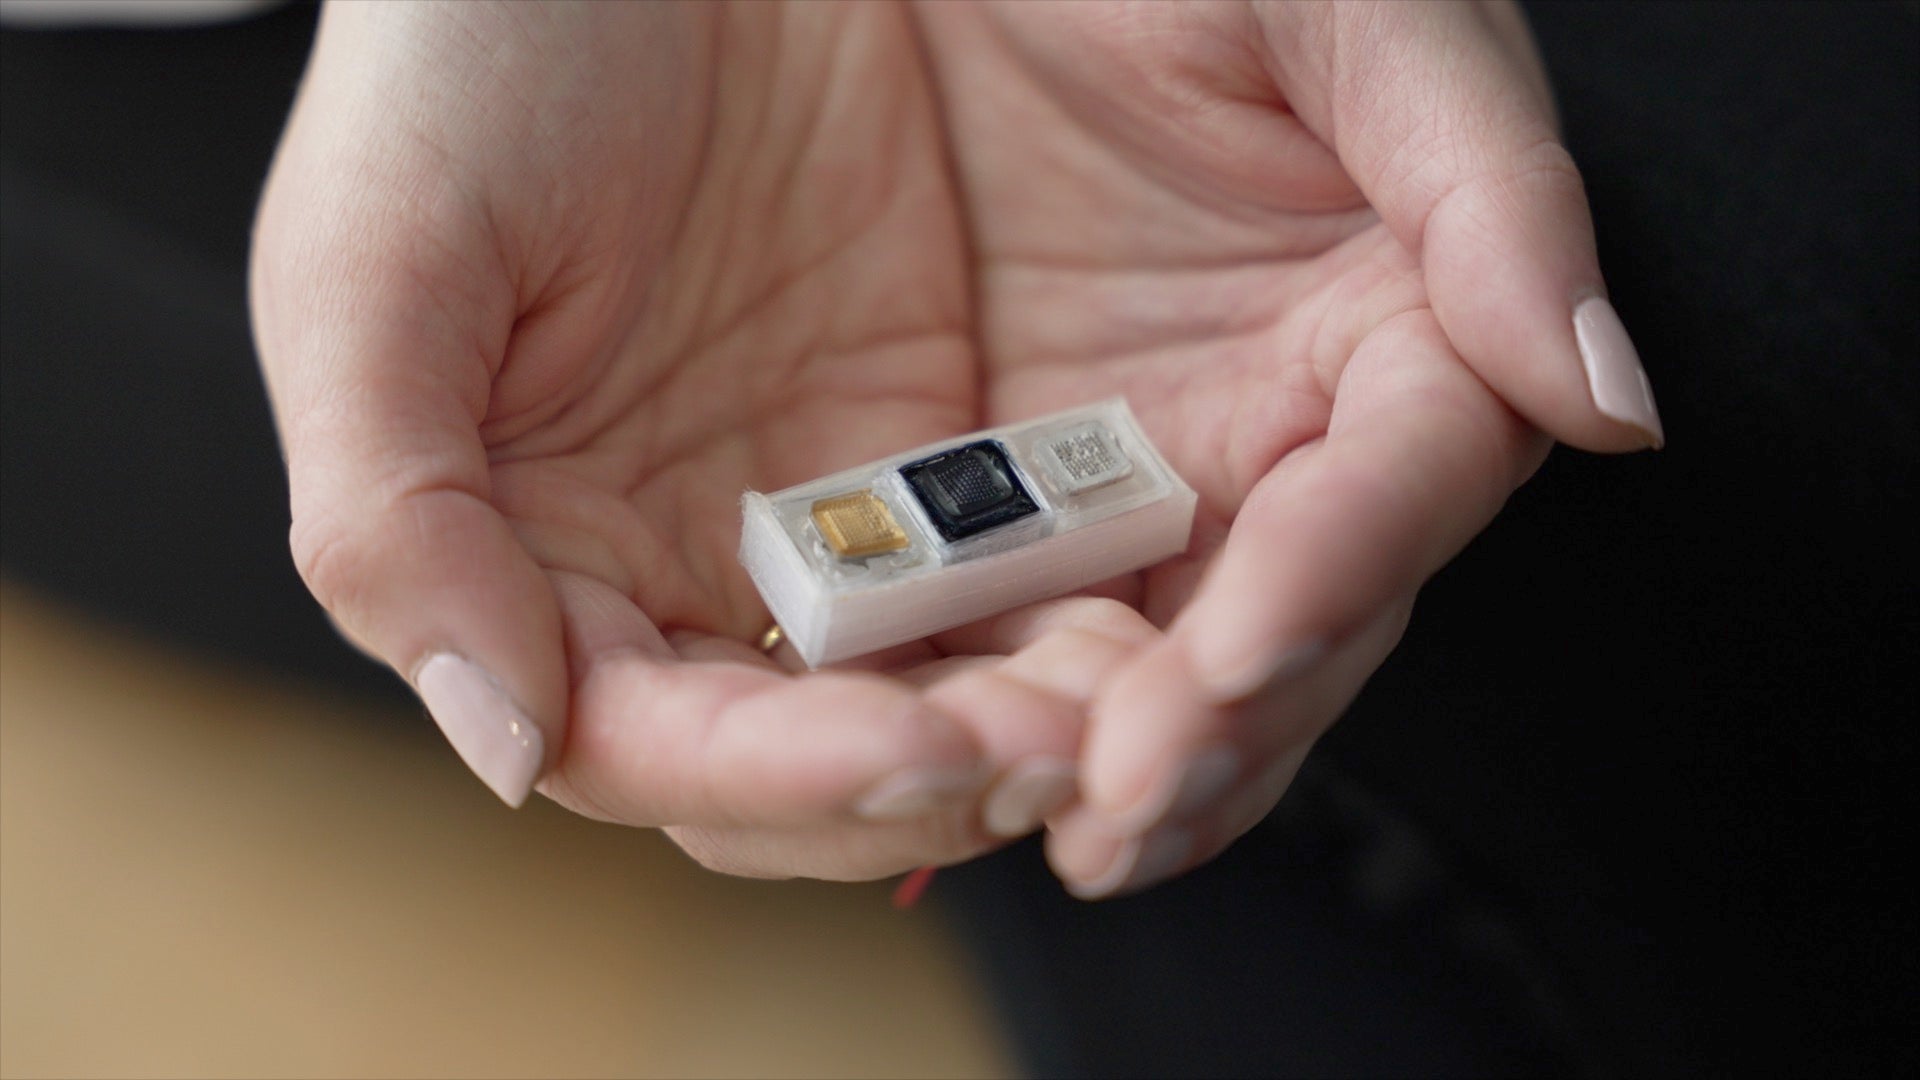 A photo of the biosensor device prototype being held in two hands.